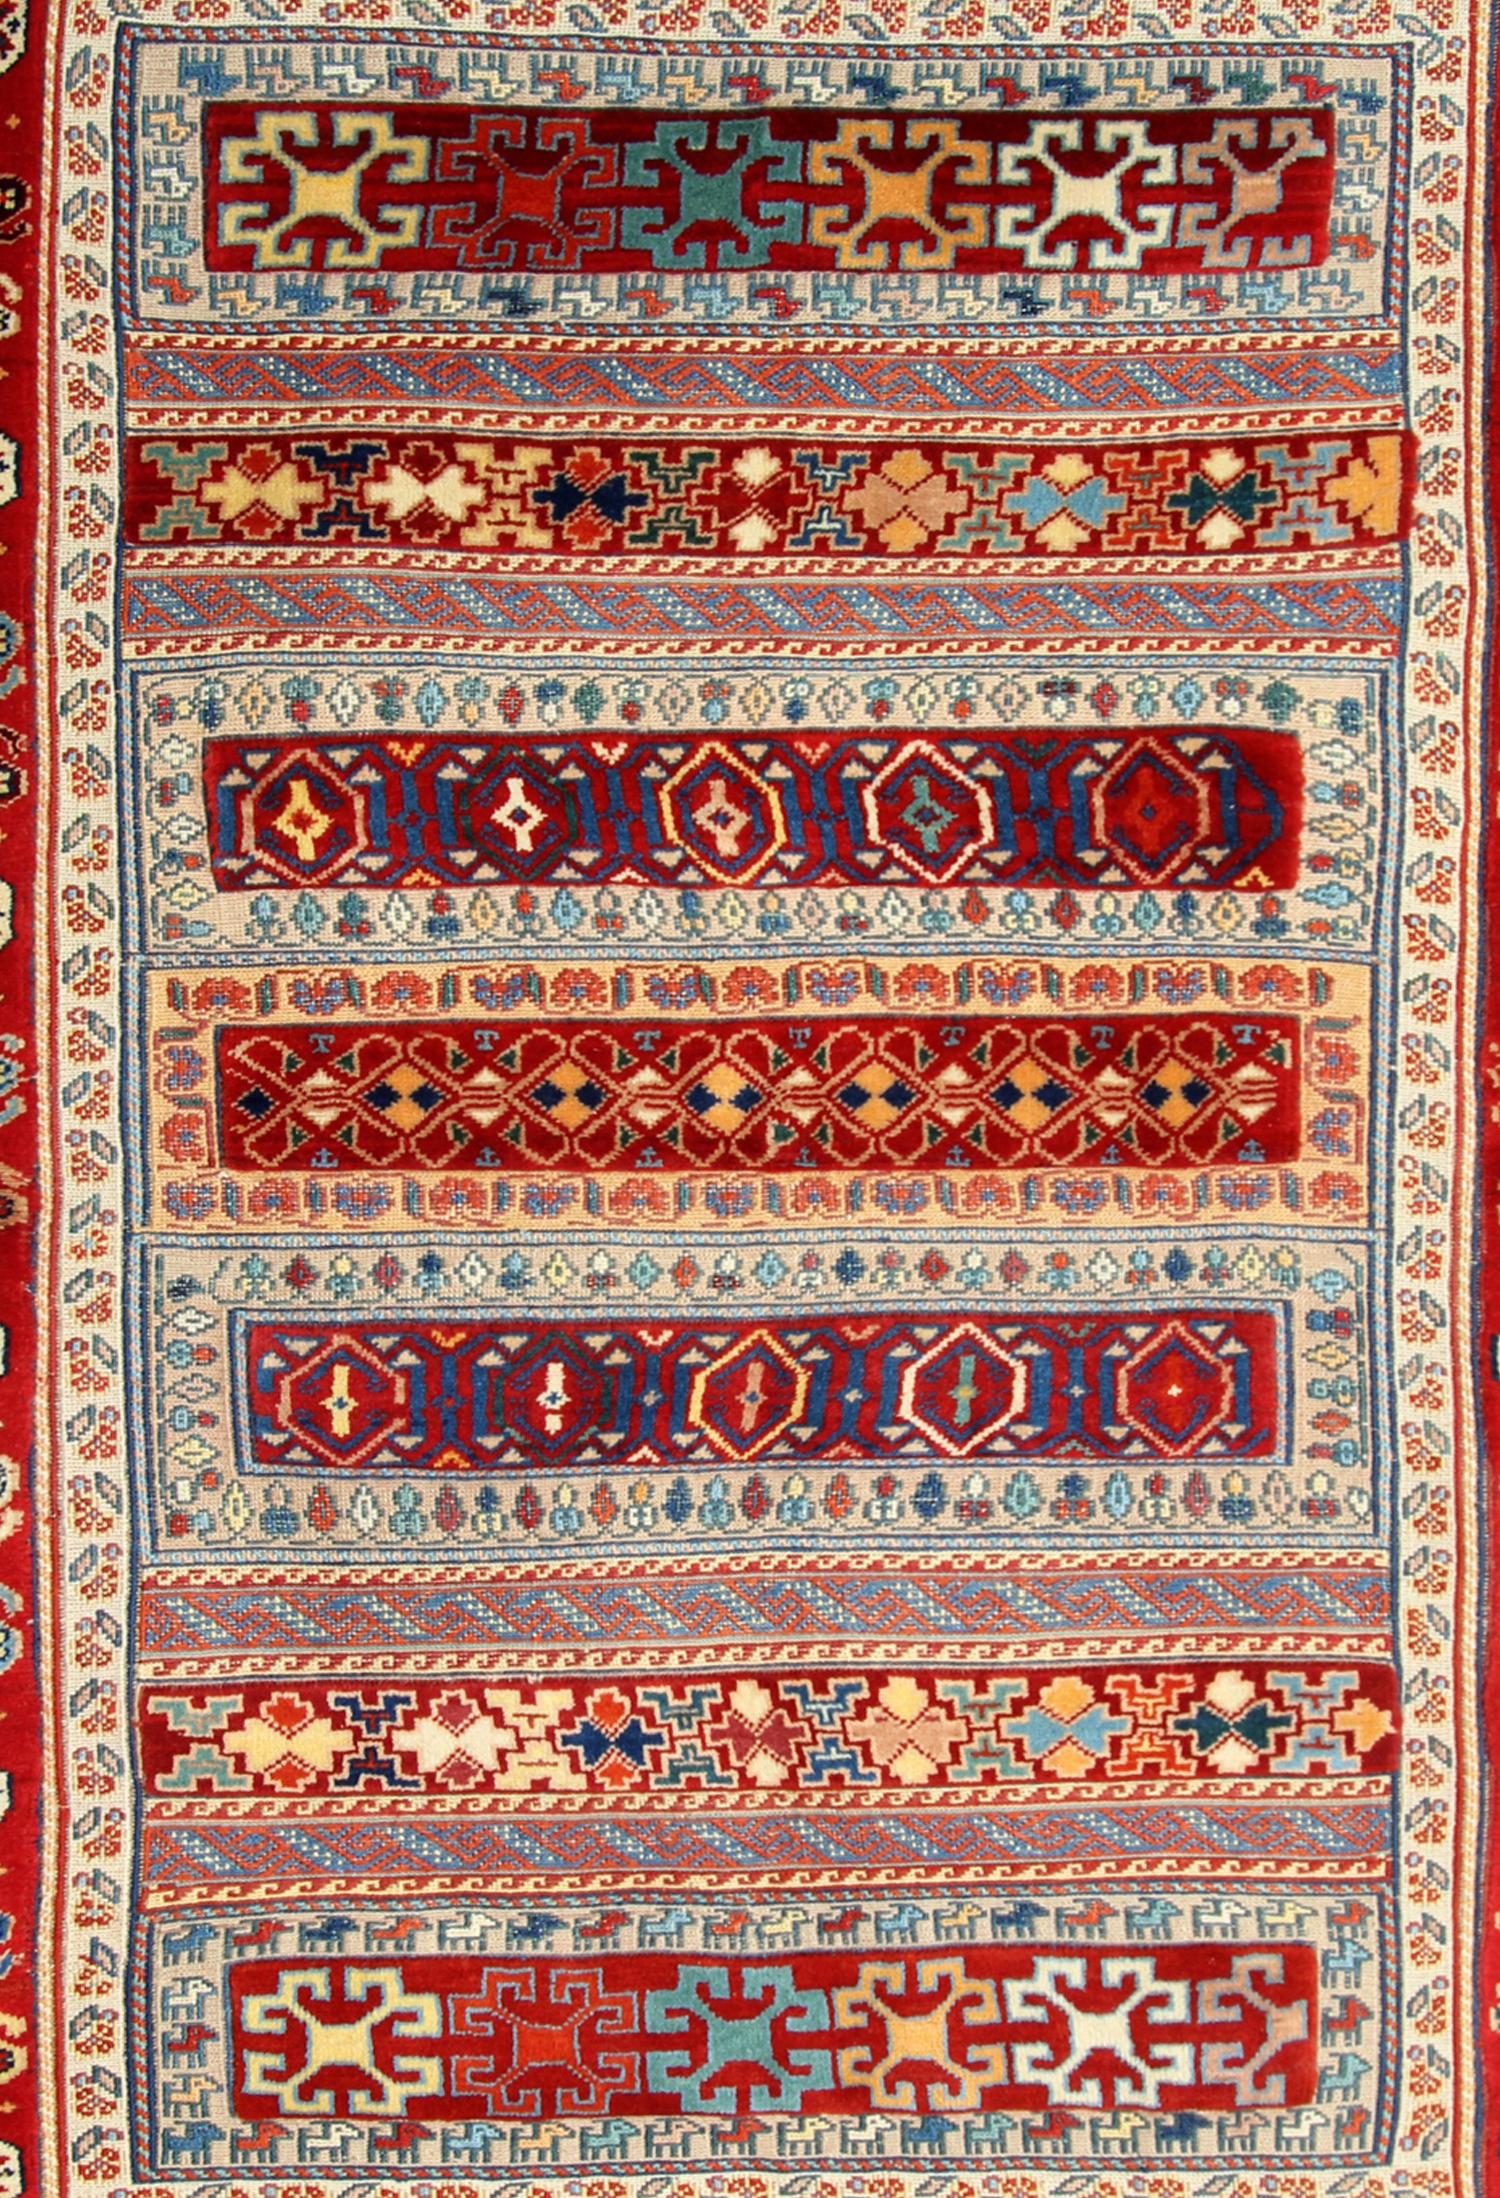 This unique kilim rug was woven by hand with the finest locally sourced hand-spun wool and cotton dyed with organic vegetable dyeing techniques. The design features a highly decorative stripe design with tribal motifs in orange, beige blue, and